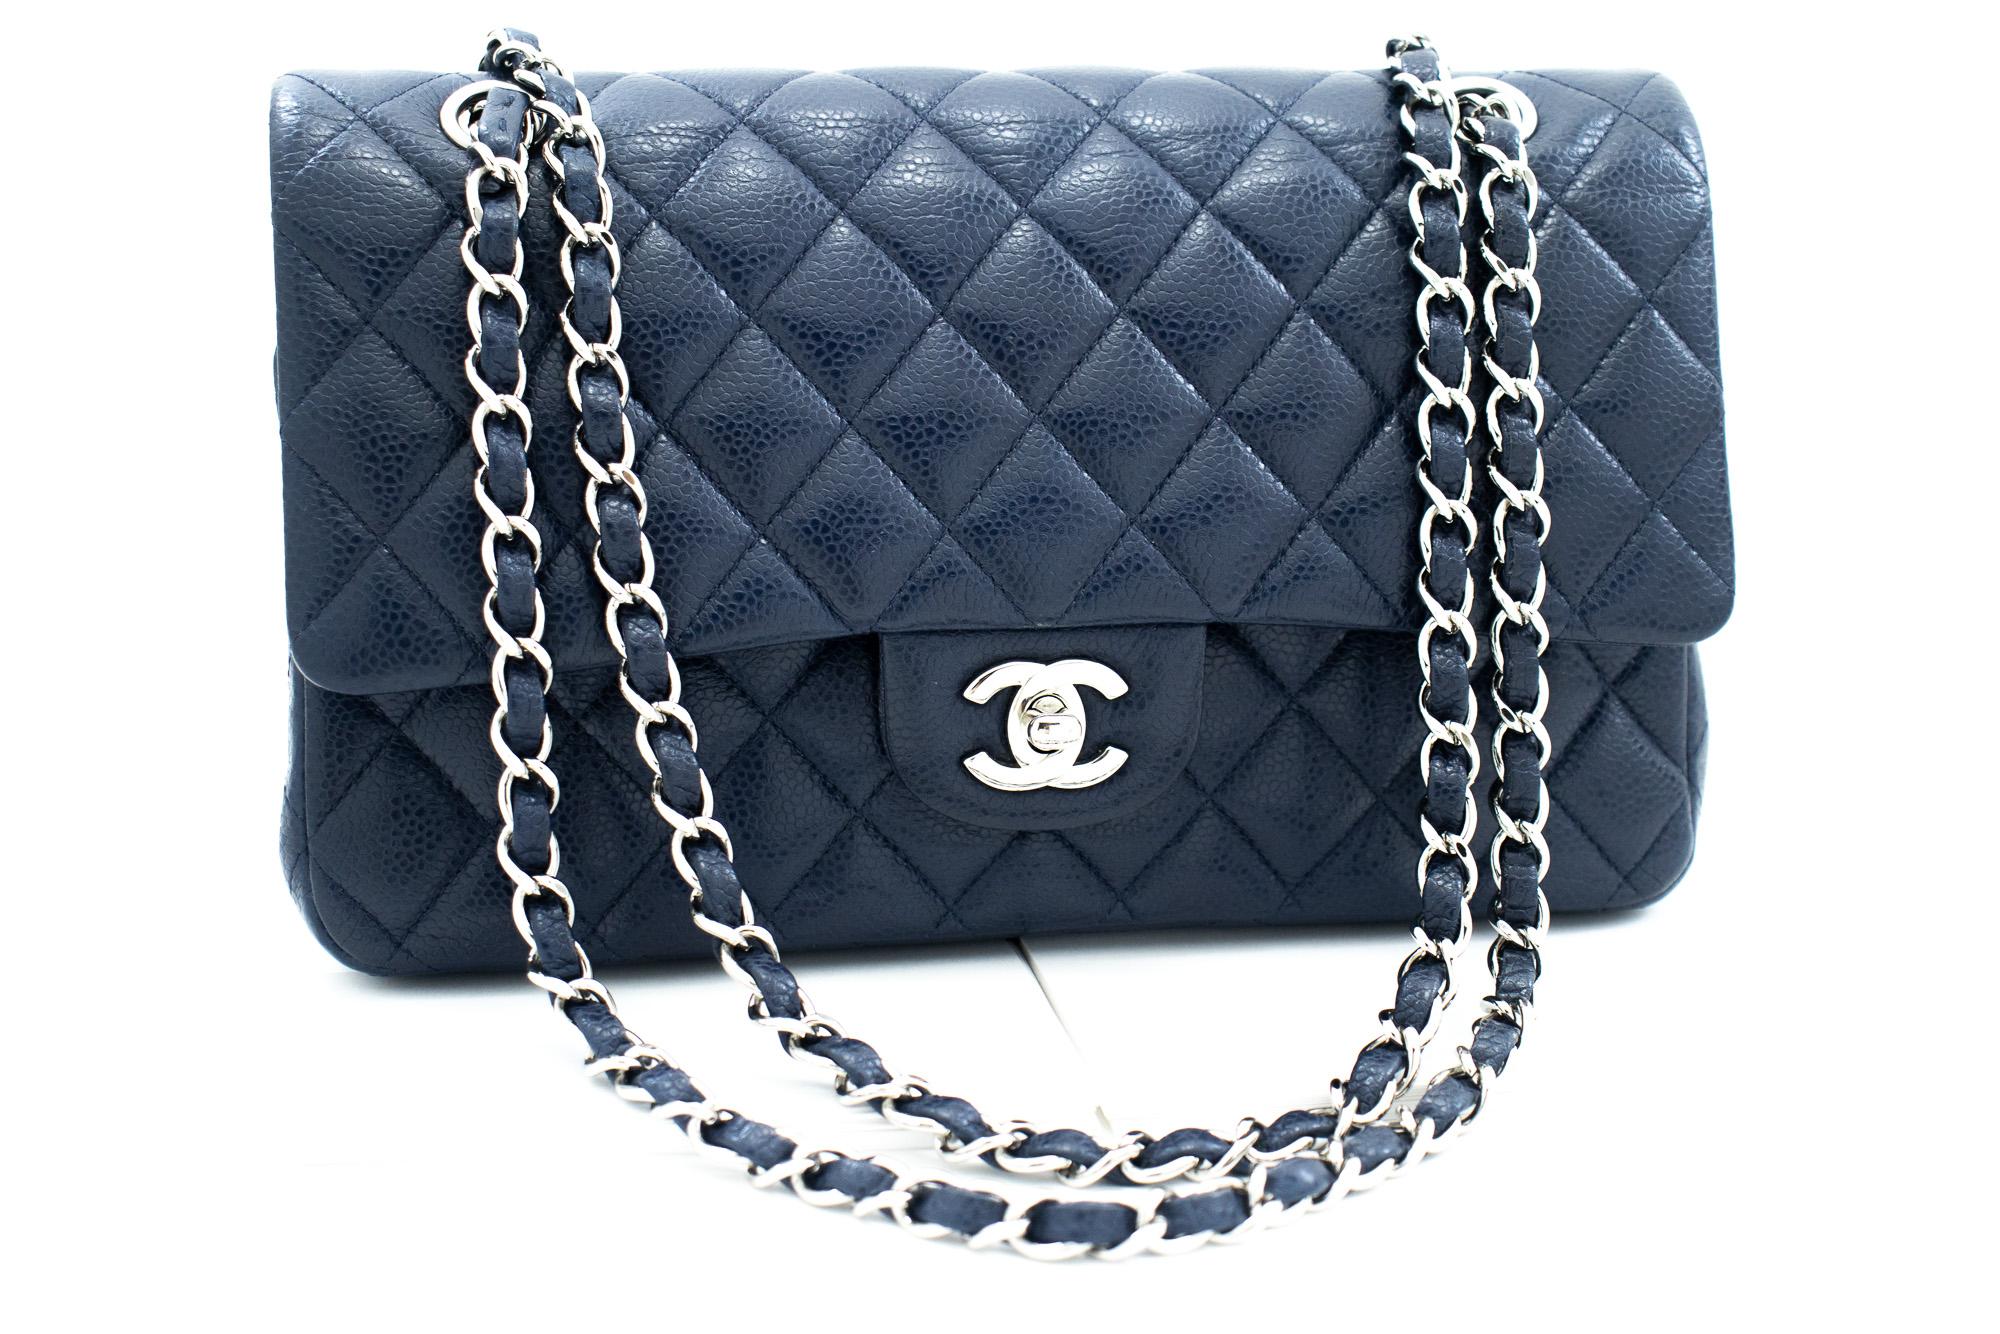 An authentic CHANEL Navy Caviar Double Flap Chain Shoulder Bag Quilted Leather. The color is Navy. The outside material is Leather. The pattern is Solid. This item is Contemporary. The year of manufacture would be 2011.
Conditions & Ratings
Outside